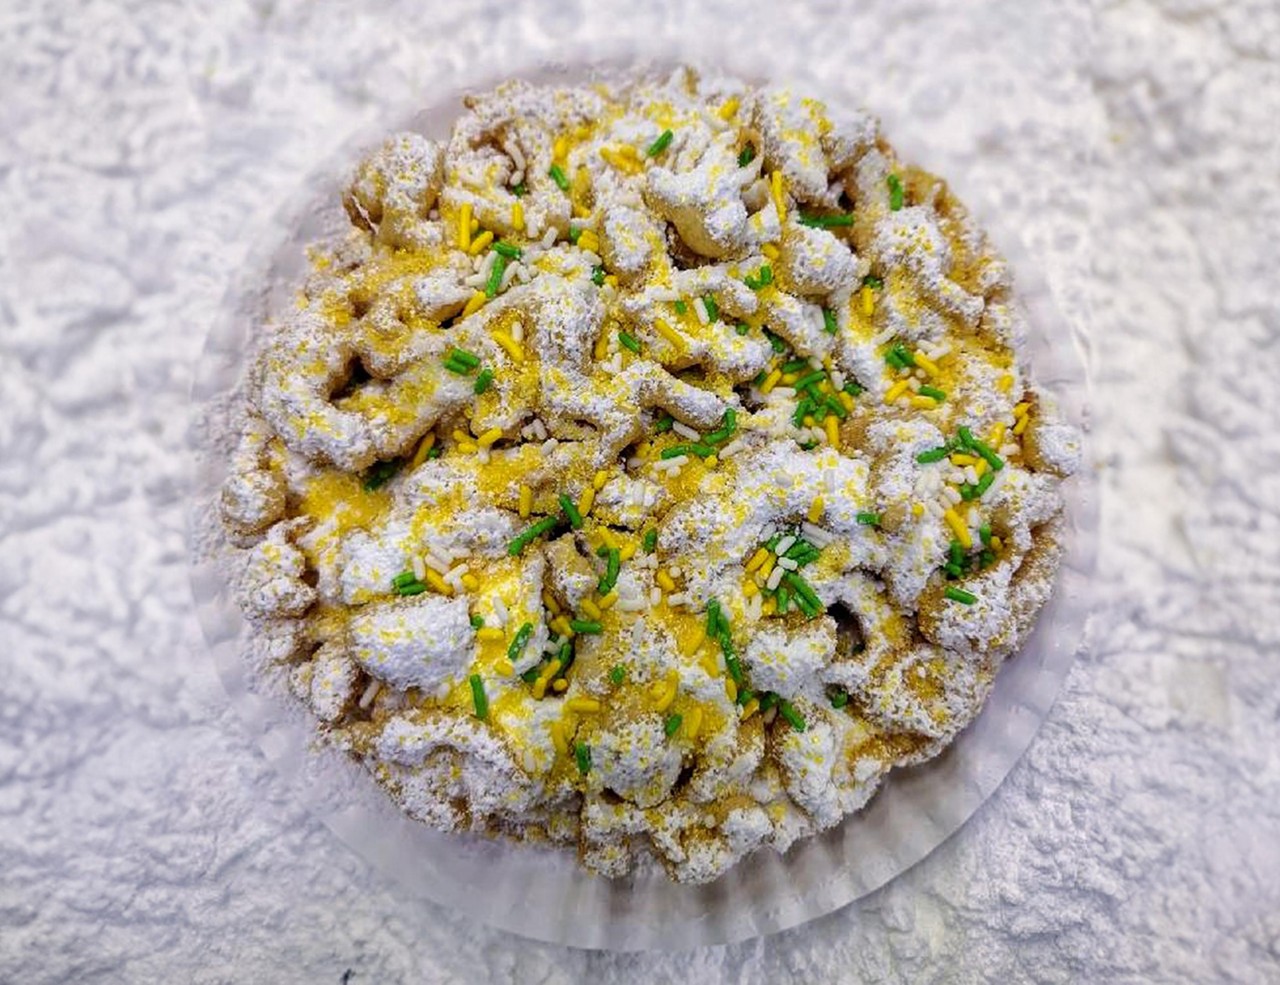 LEMONADE FUNNEL CAKE
Your FAIR FAVORITE with a new twist. Classic funnel cake with a sweet lemon flavored topping.
Topscan Funnel Cakes